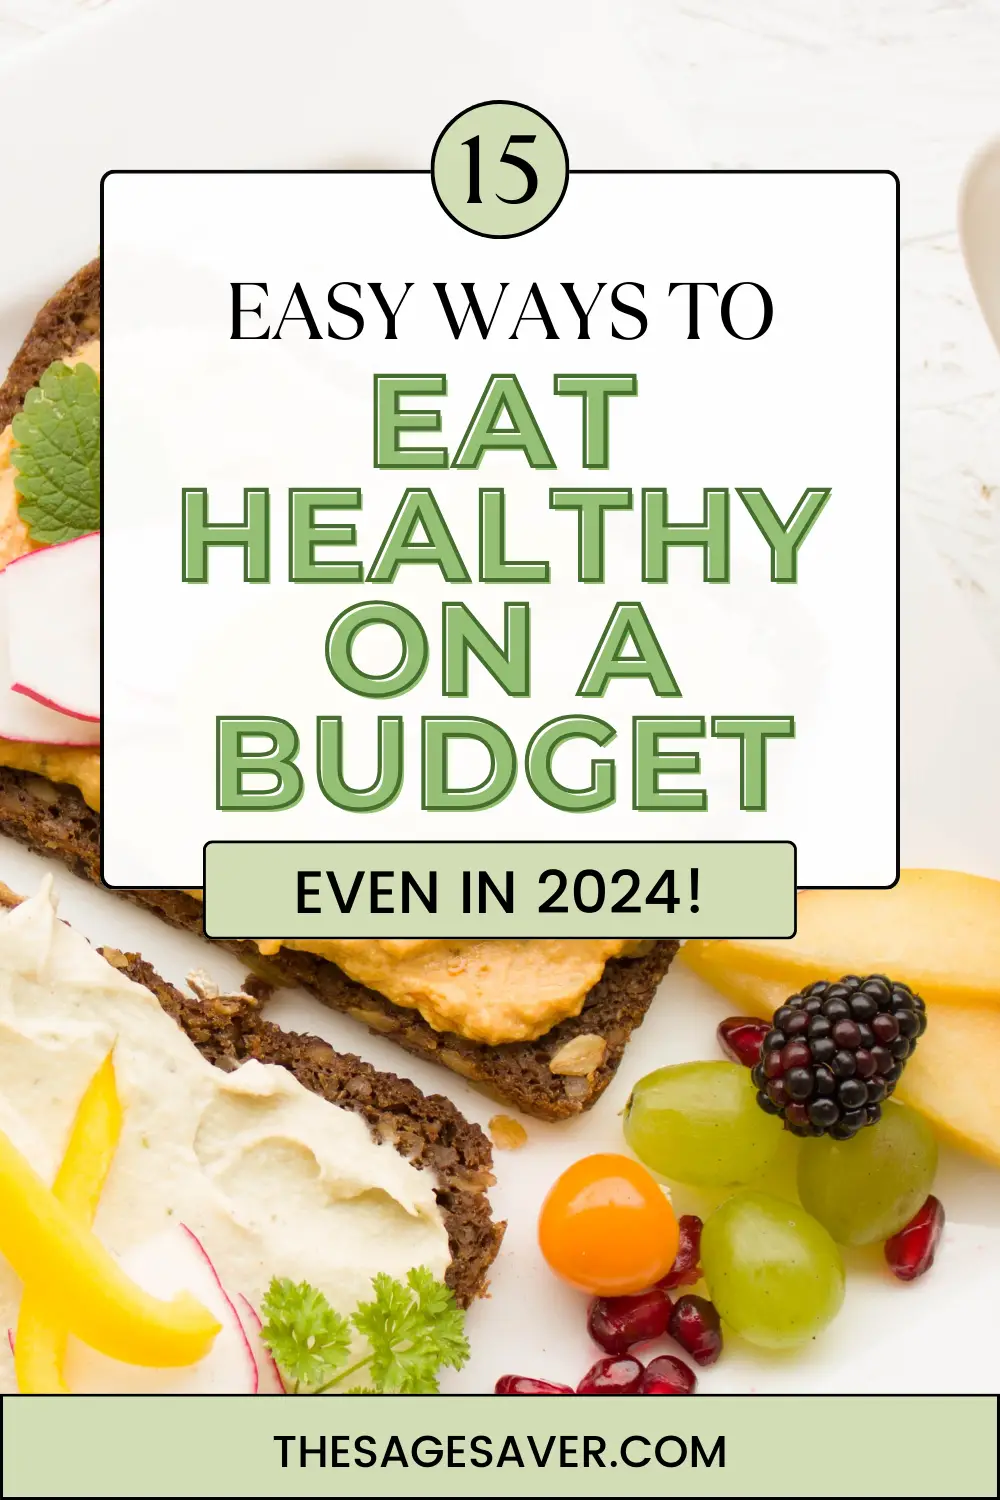 Easy Ways to Eat Healthy on a Budget in 2024